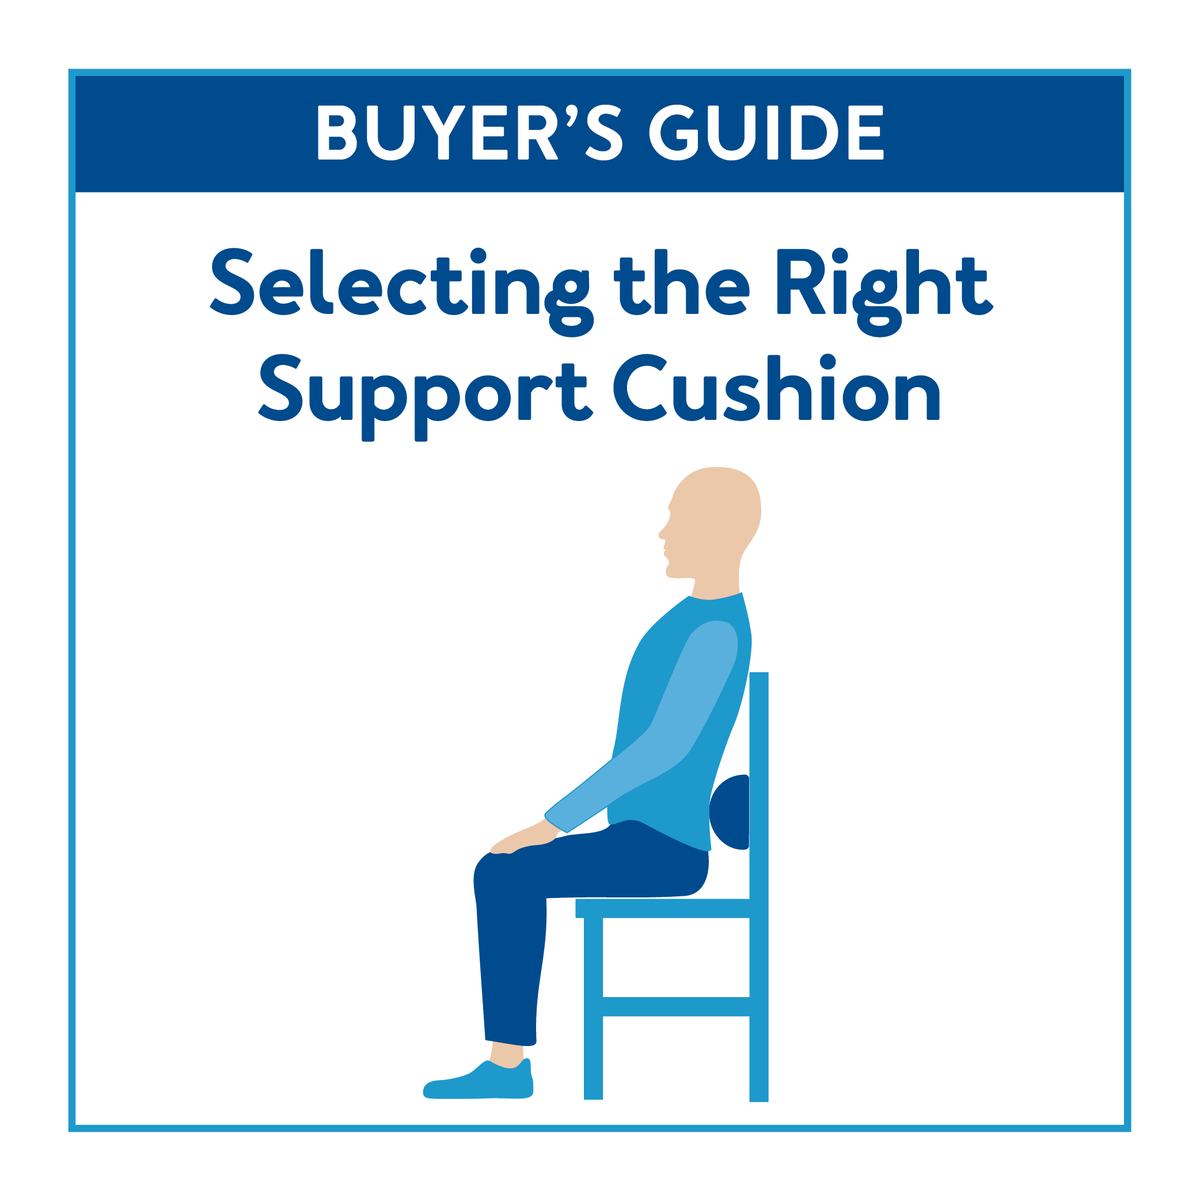 A Carex Support cushion surrounded by a blue border with text Buyer’s Guide: Selecting the Right Support Cushion